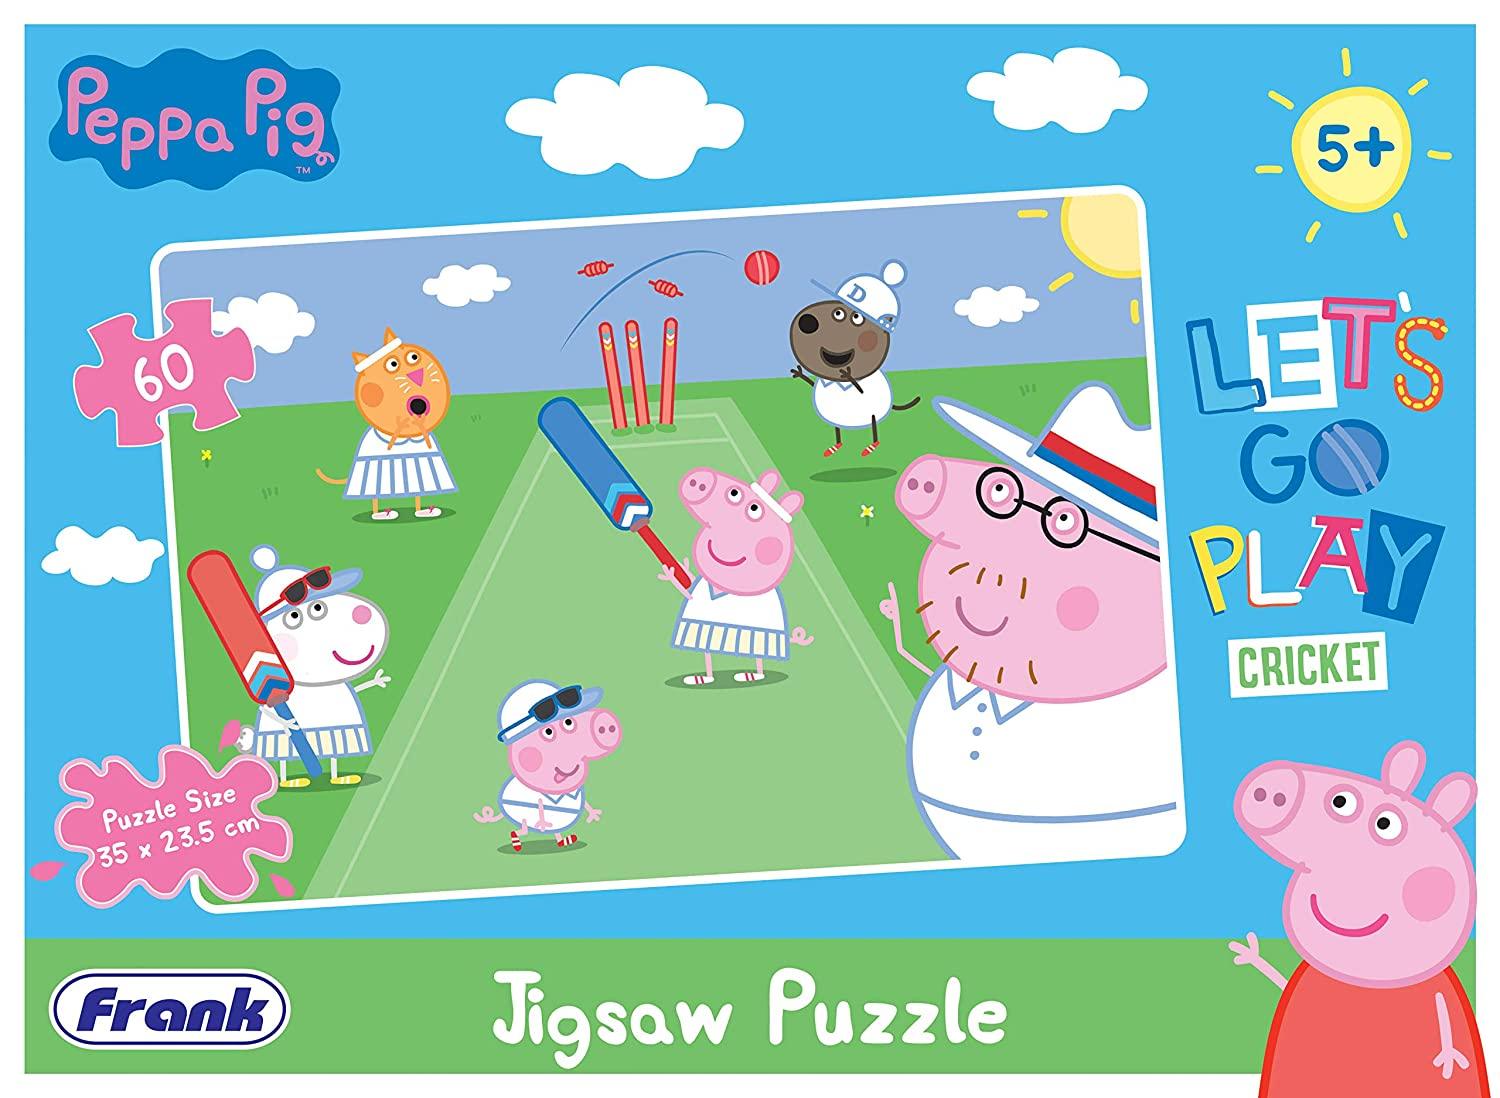 Frank Peppa Pig: Lets Go Play Cricket Puzzle For 5 Year Old Kids And Above